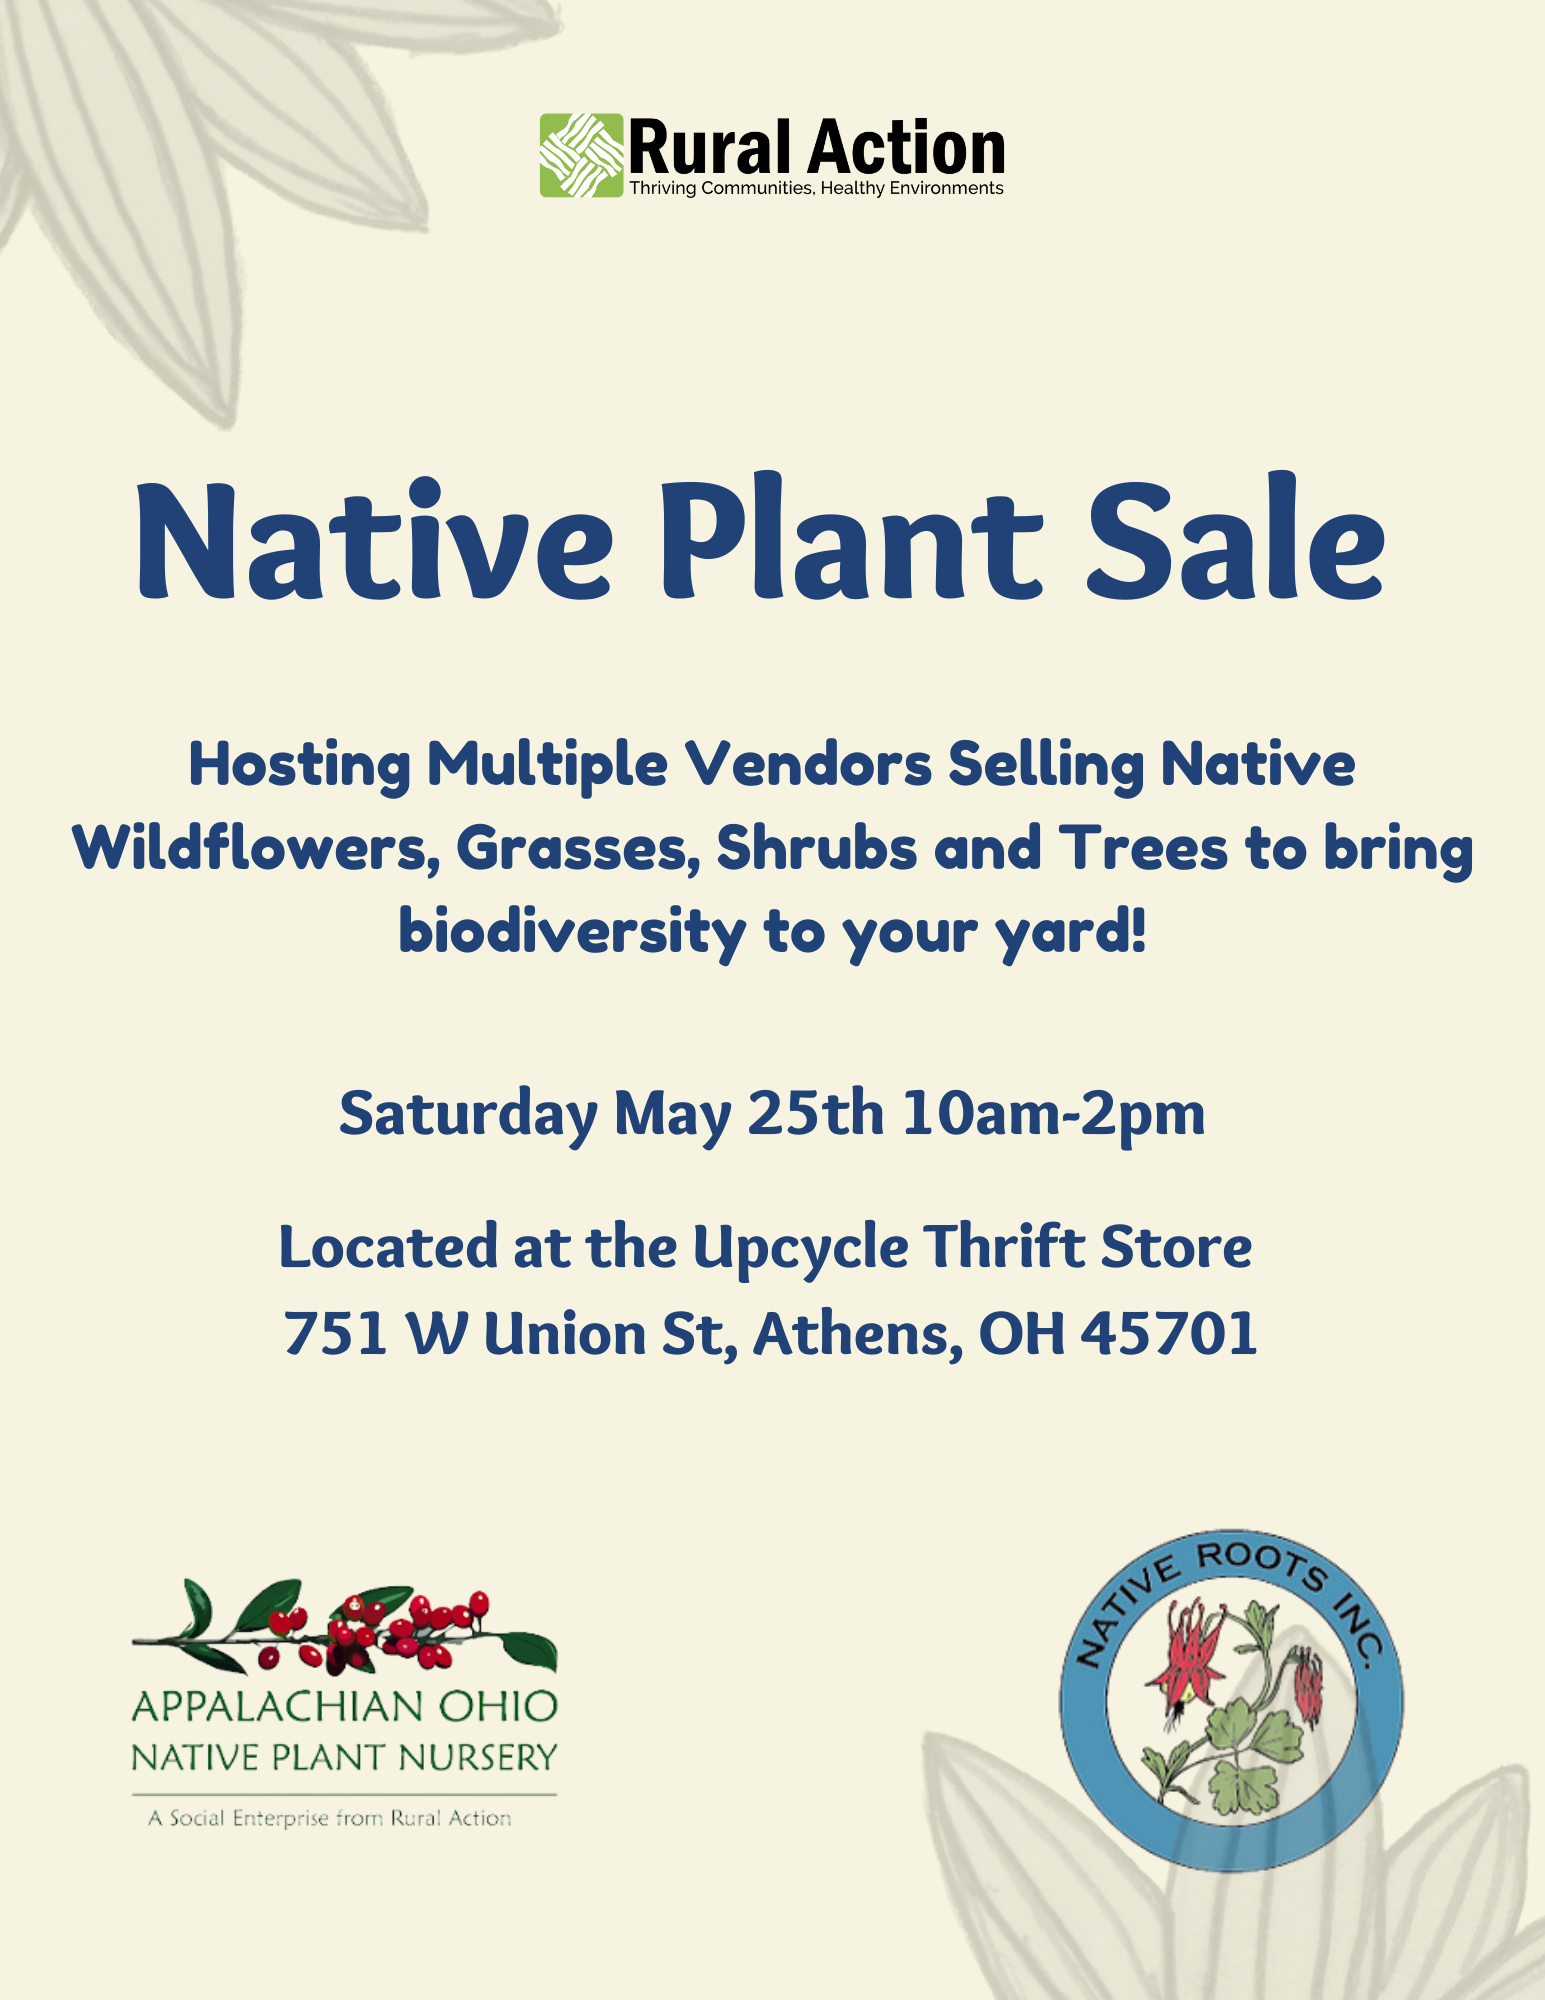 A flyer for the Native Plant Sale event